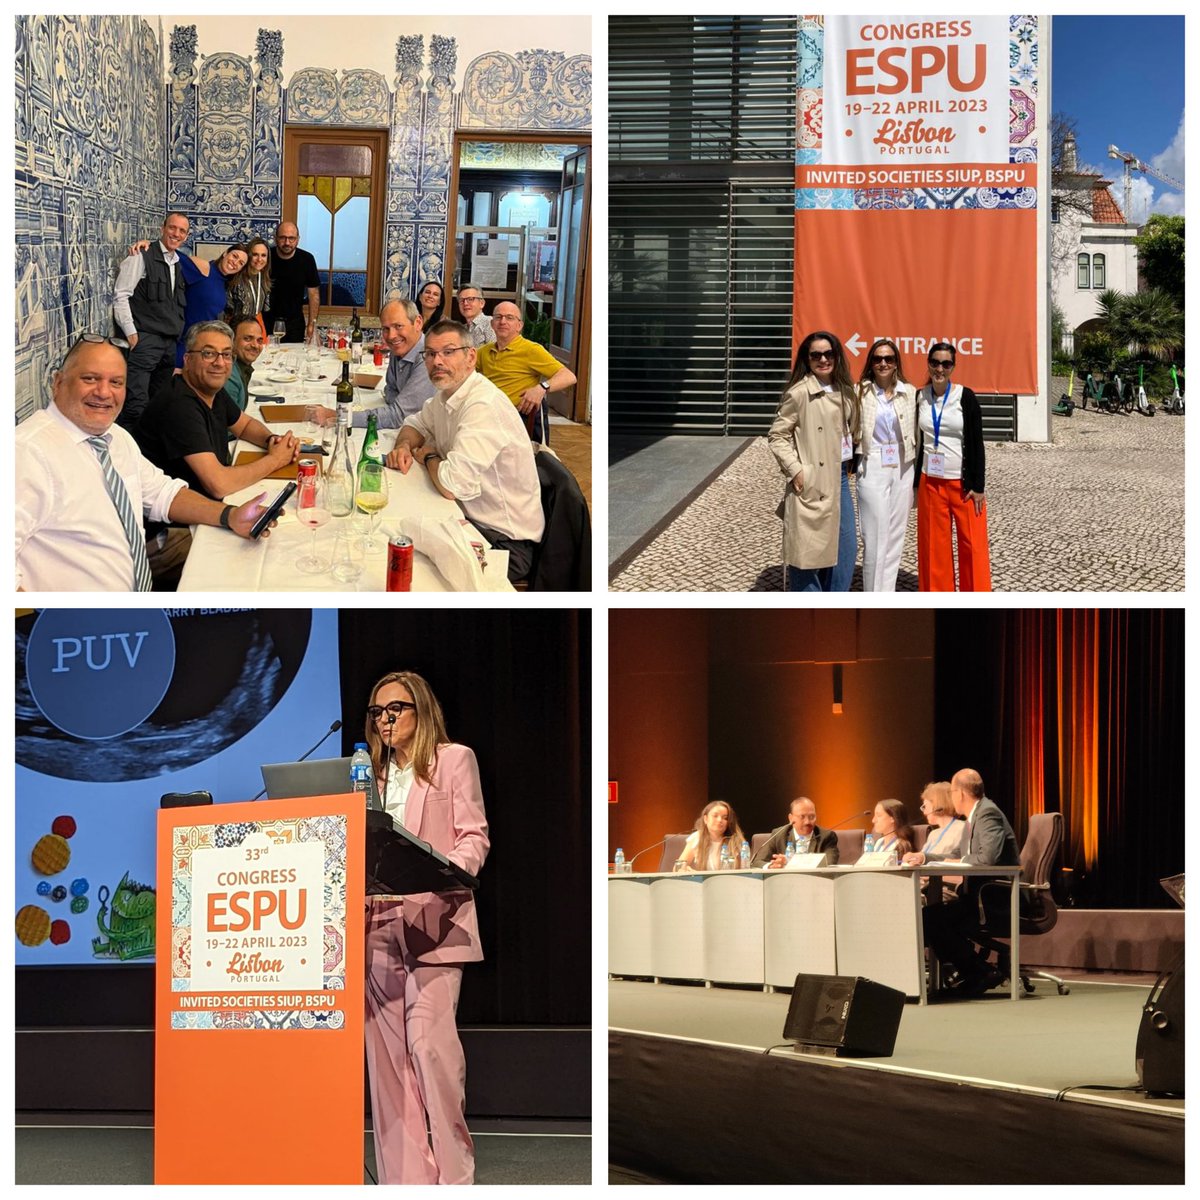 It has been awesome to see all the worldwide ped urologists in this oustanding #Espu23 meeting.
Congratulations @ESPUorg for this  great organisation and thank you to invite @siupurol
@bspu 

@yeyaquimapa @MariRoRo81 @FPuigvert